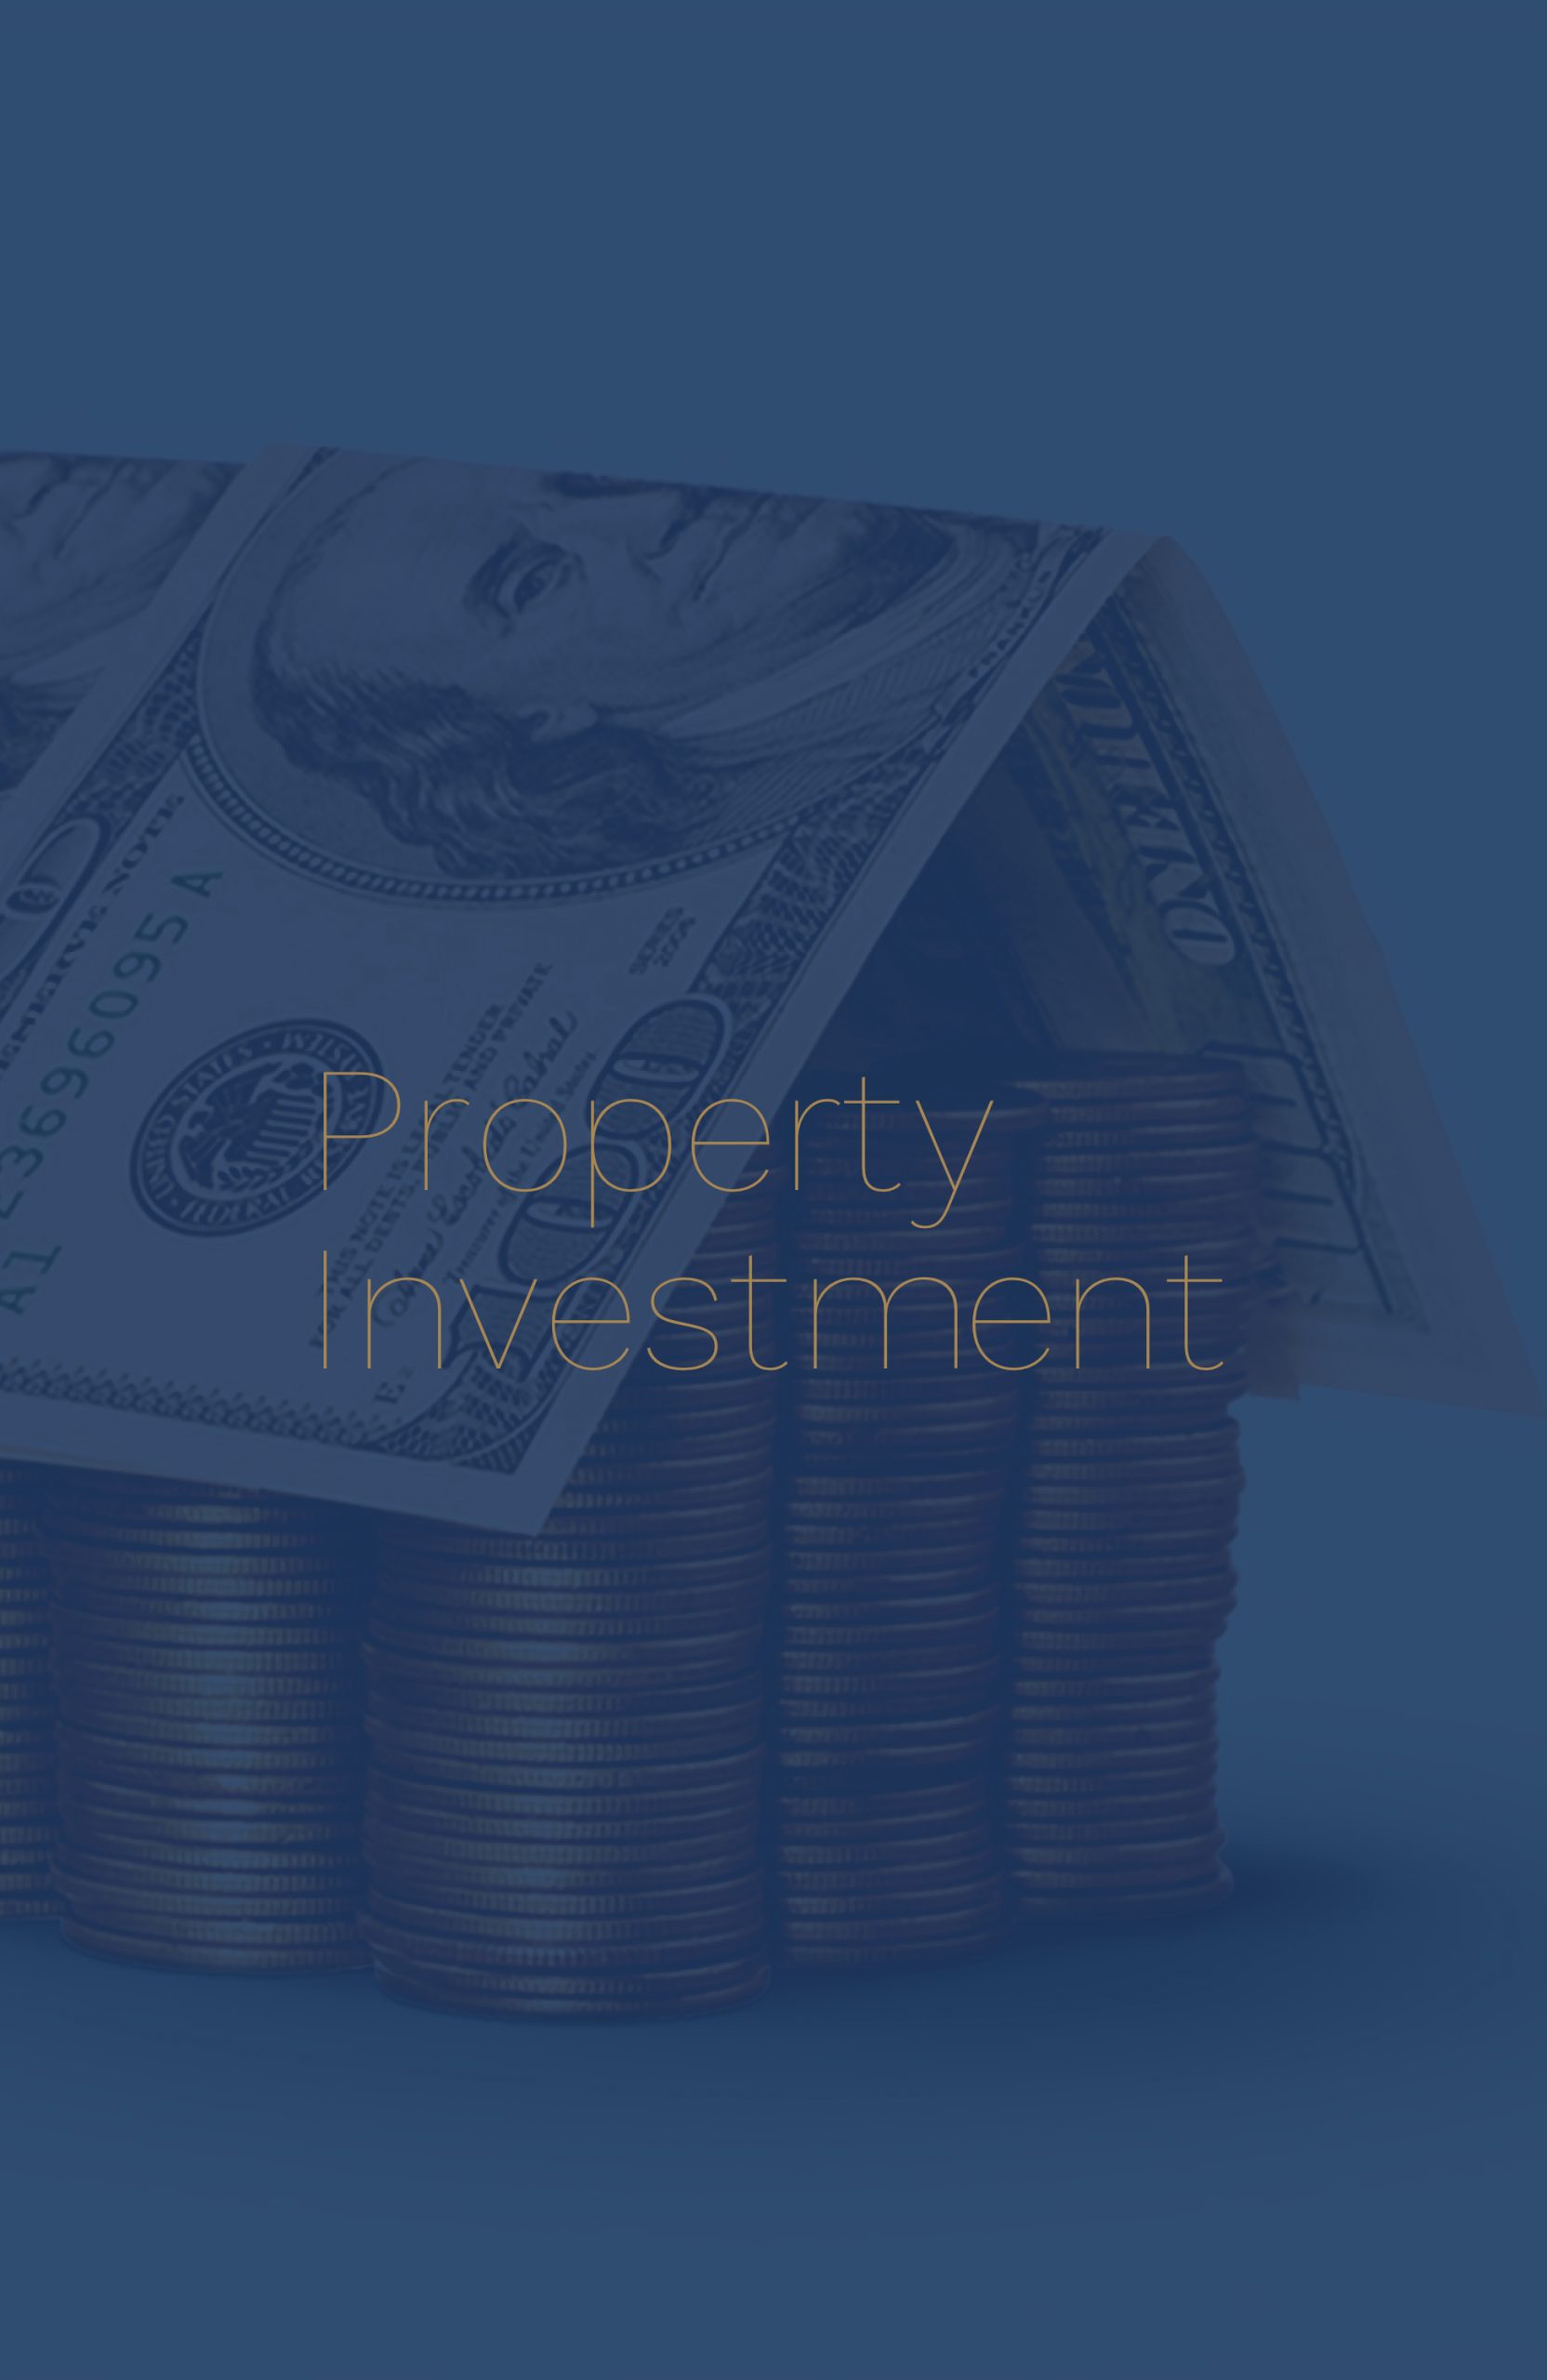 Property Investment Engage Finance Mobile Header Image